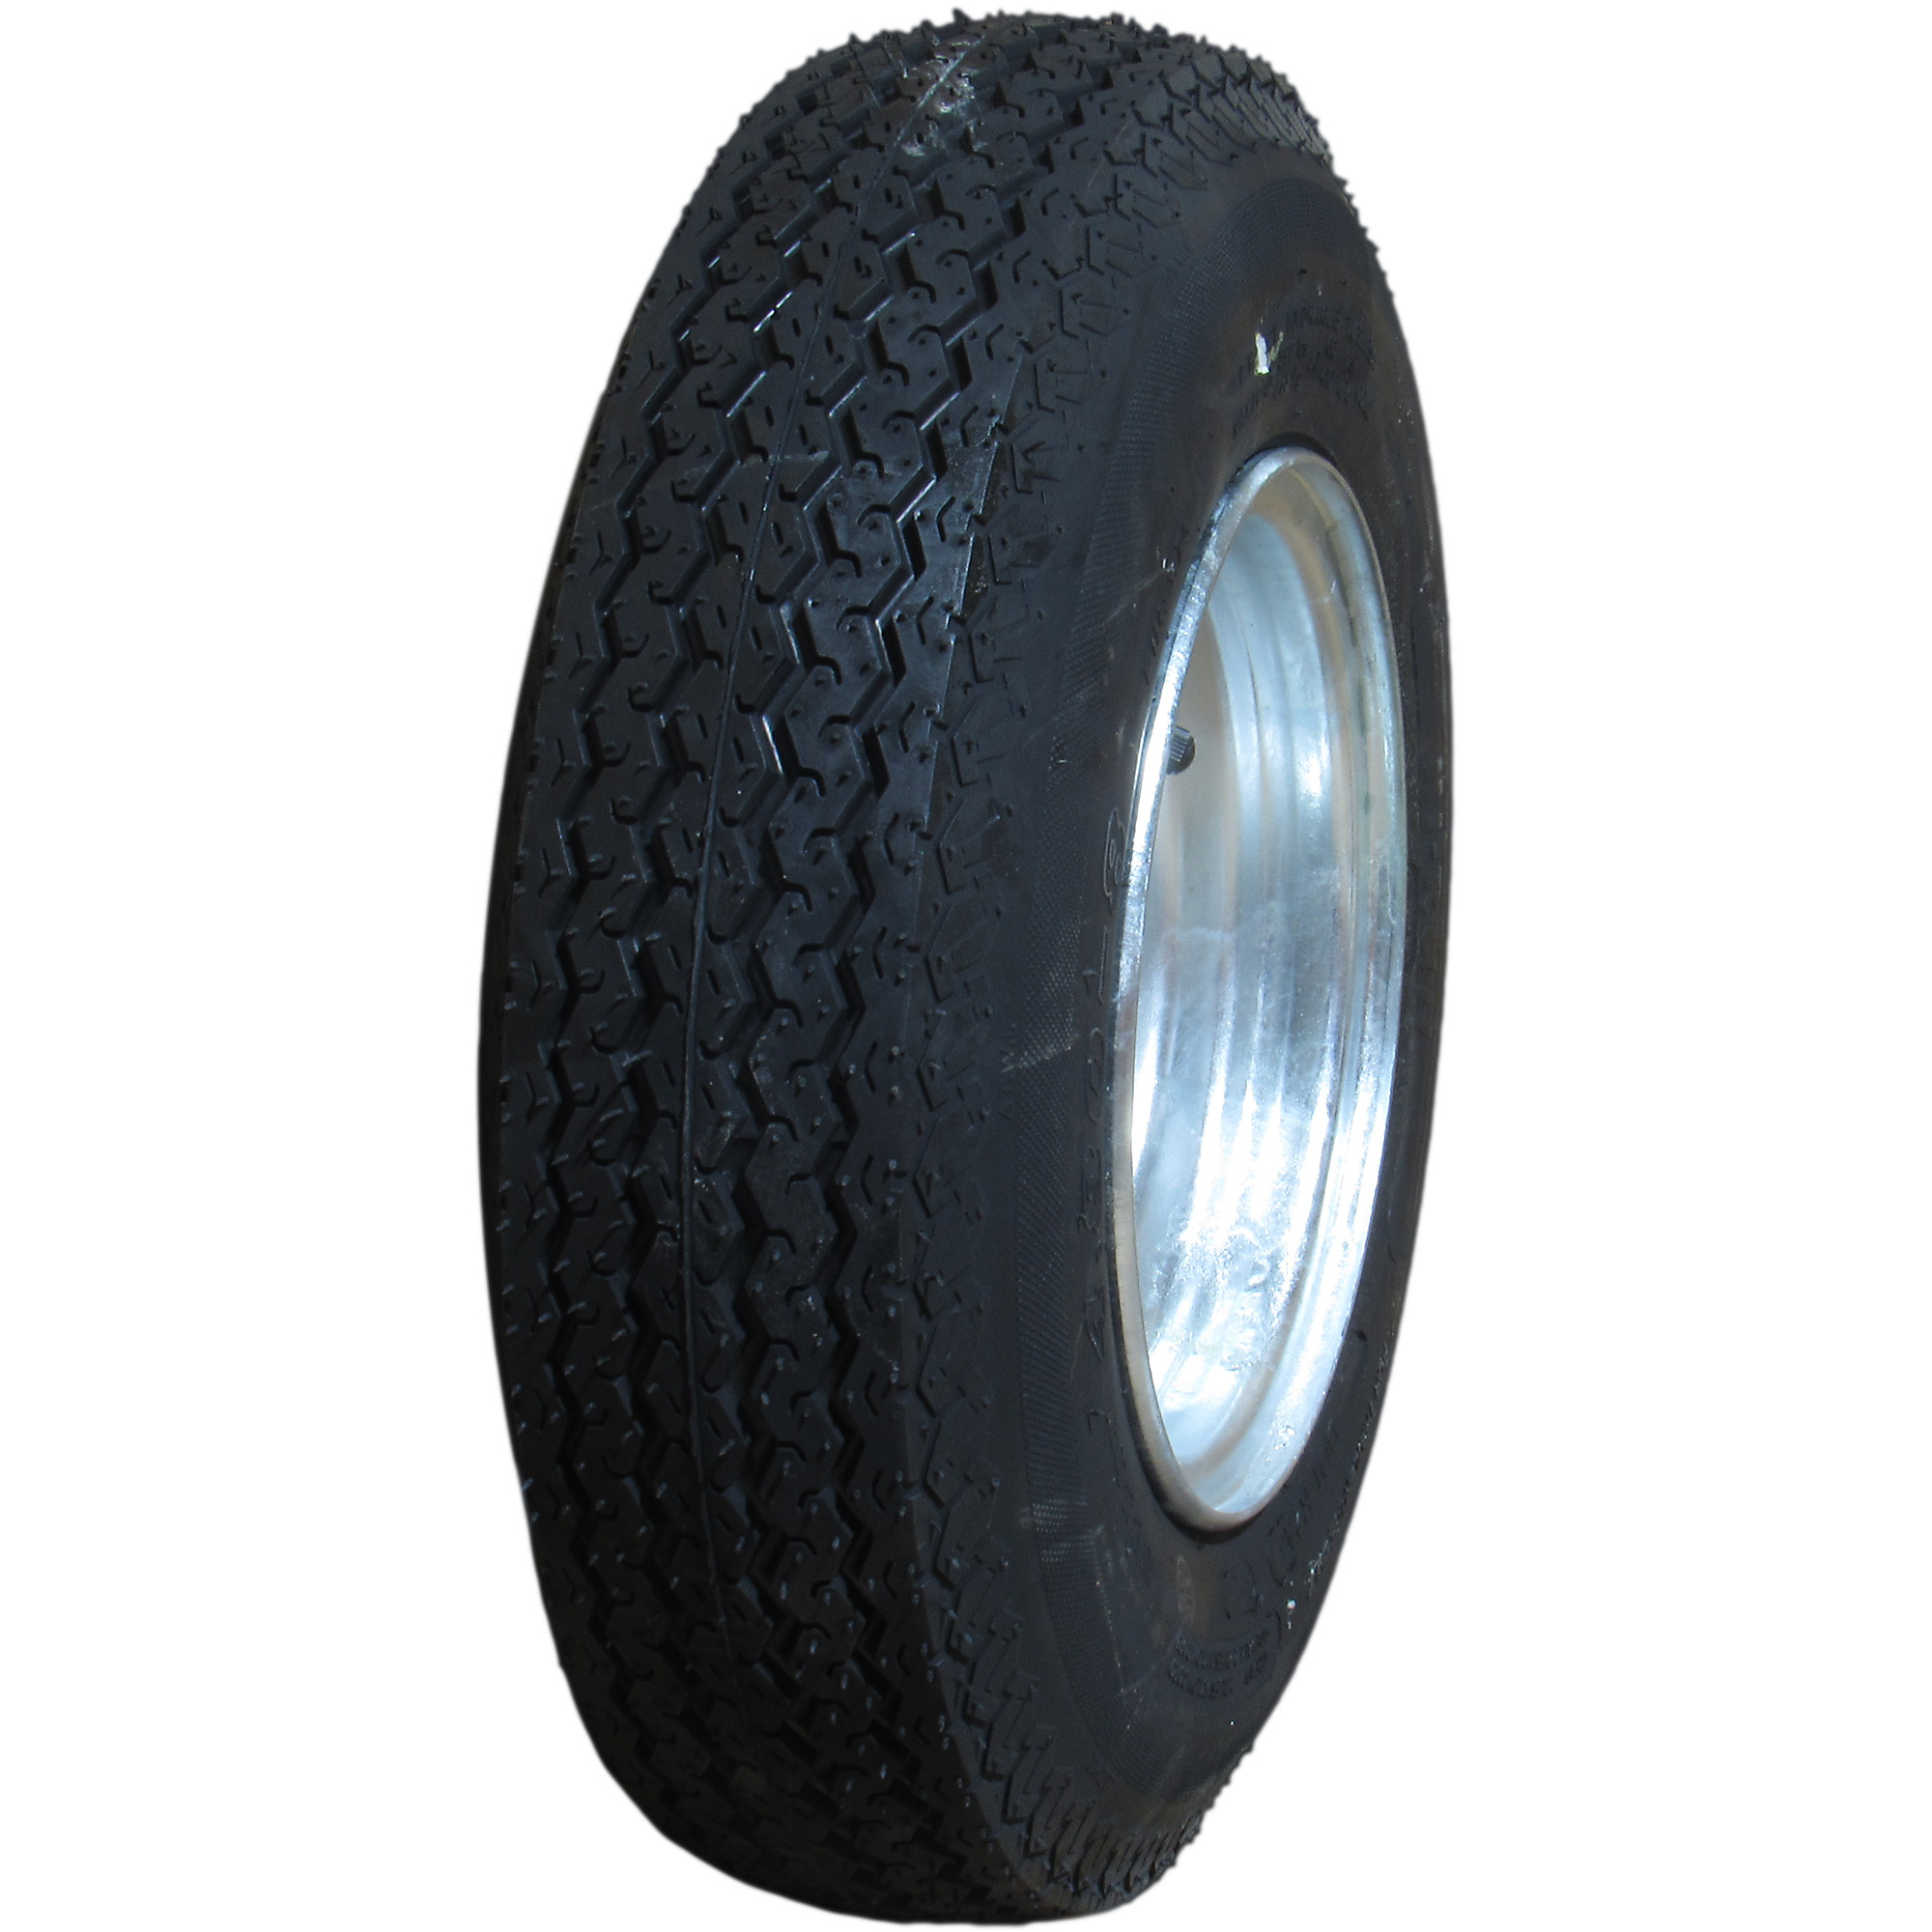 HI-RUN, Highway Trailer Tire Assembly, Galvanized, Tire Size 5.70-8 Load Range Rating B, Bolt Holes (qty.) 4 Model ASB1058